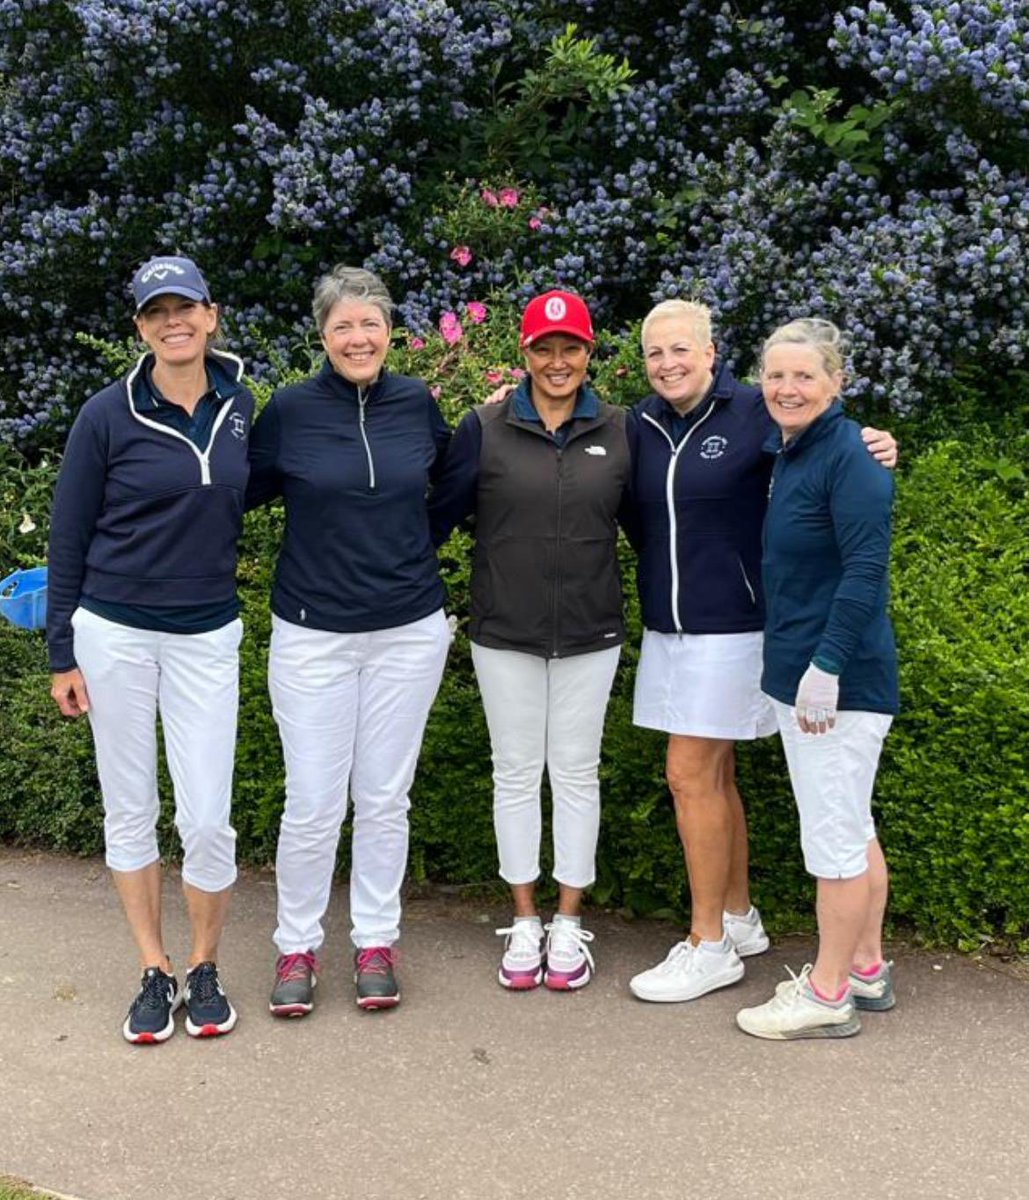 Congratulations to our Kyocera women’s team who beat Enfield GC 4.5-0.5 in a great match at home! #wherewouldyouratherbe